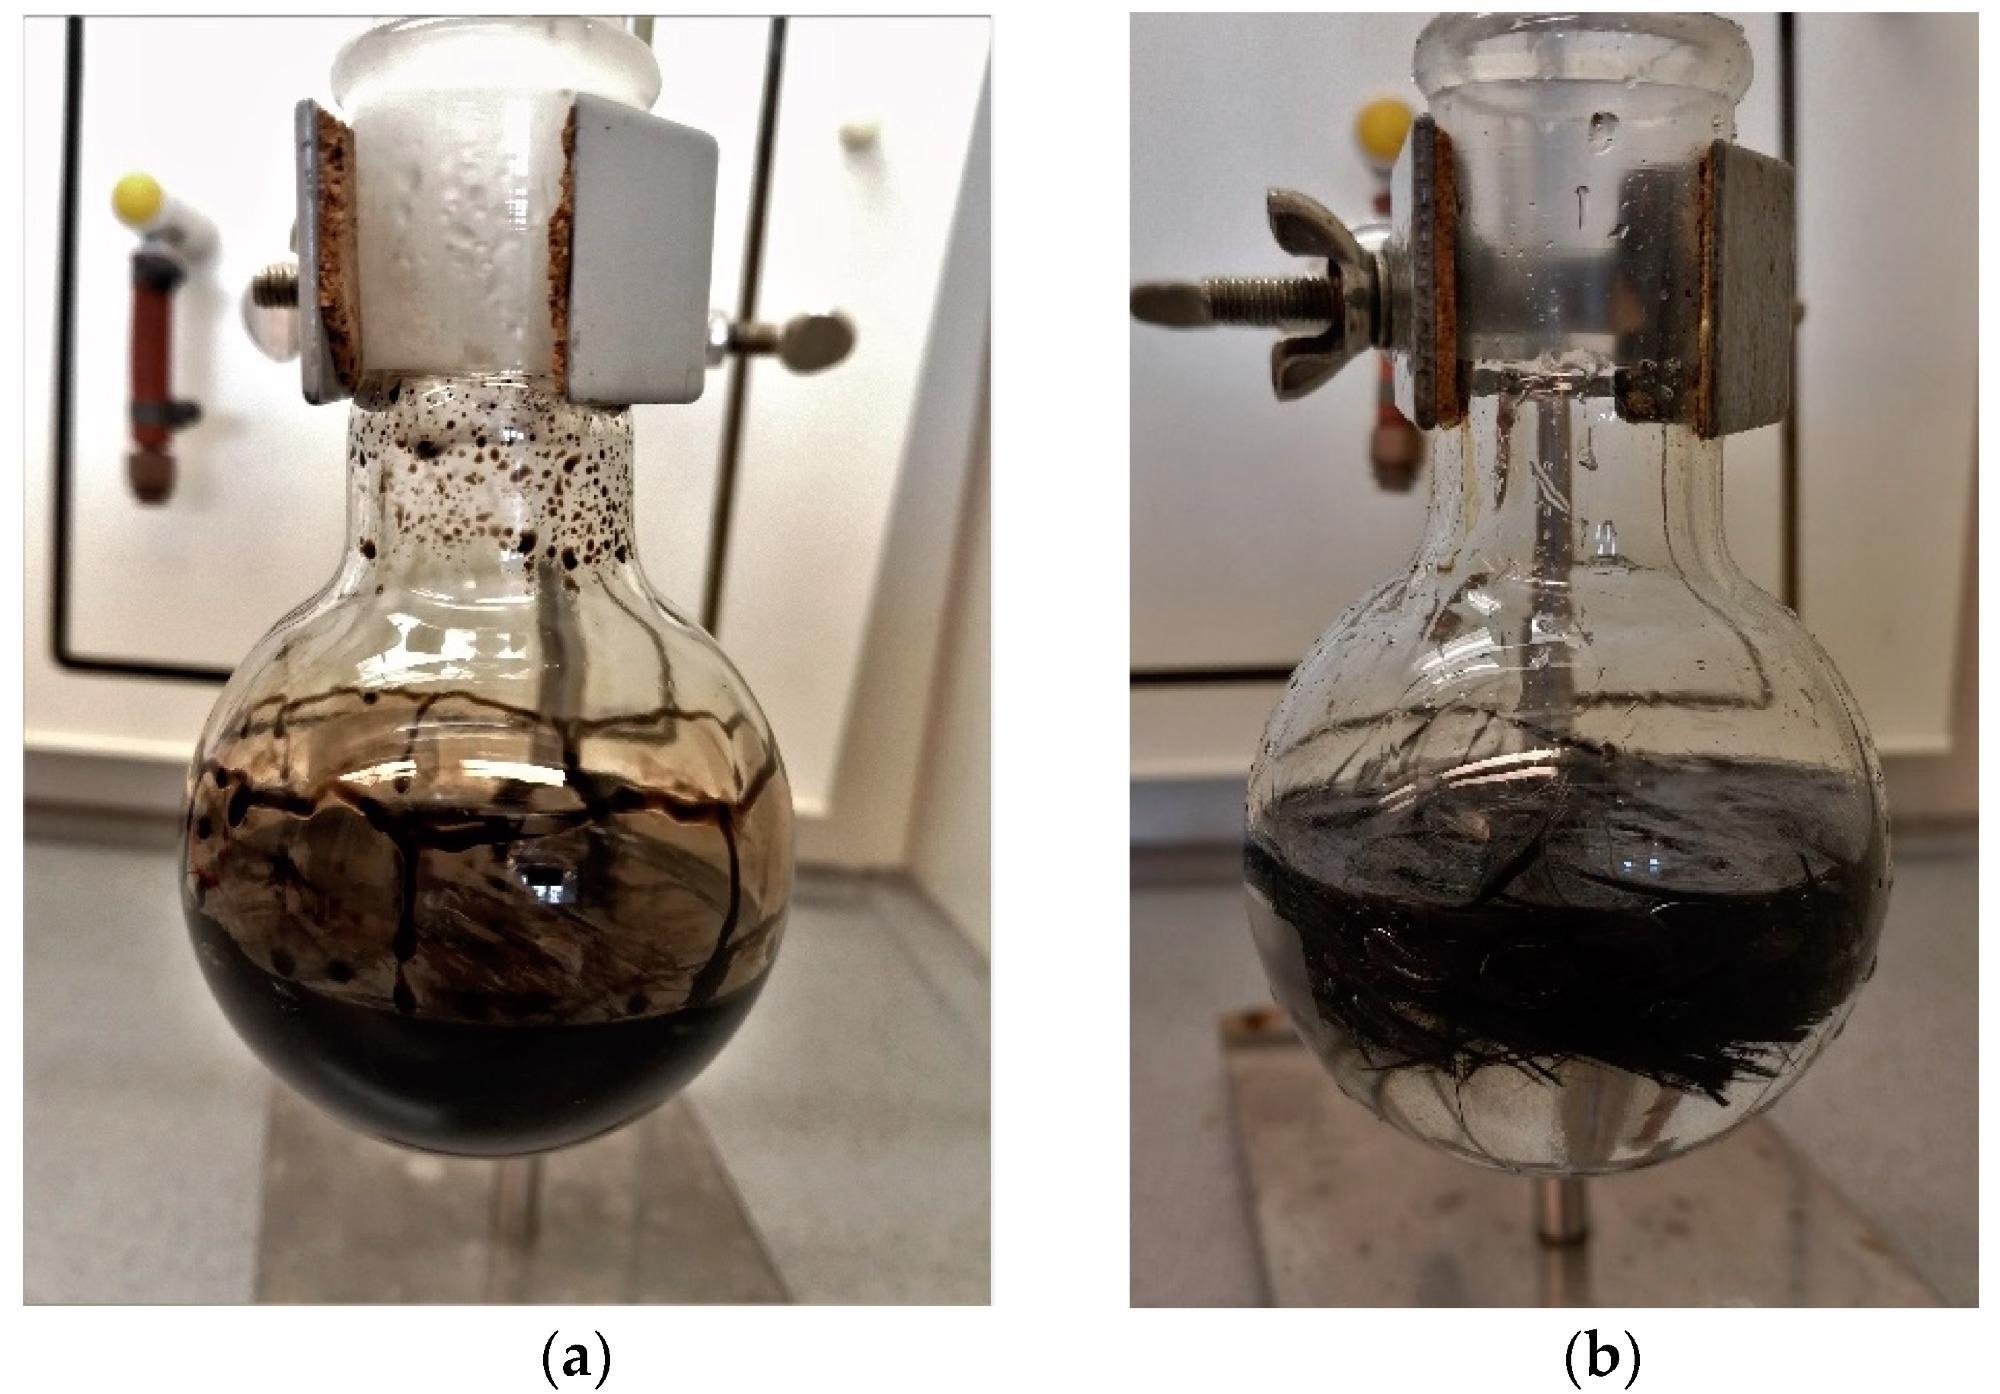 (a) Carbon/Epoxy sample during sulfuric acid digestion; (b) after the addition of Hydrogen Peroxide Description of what is contained in the second panel.